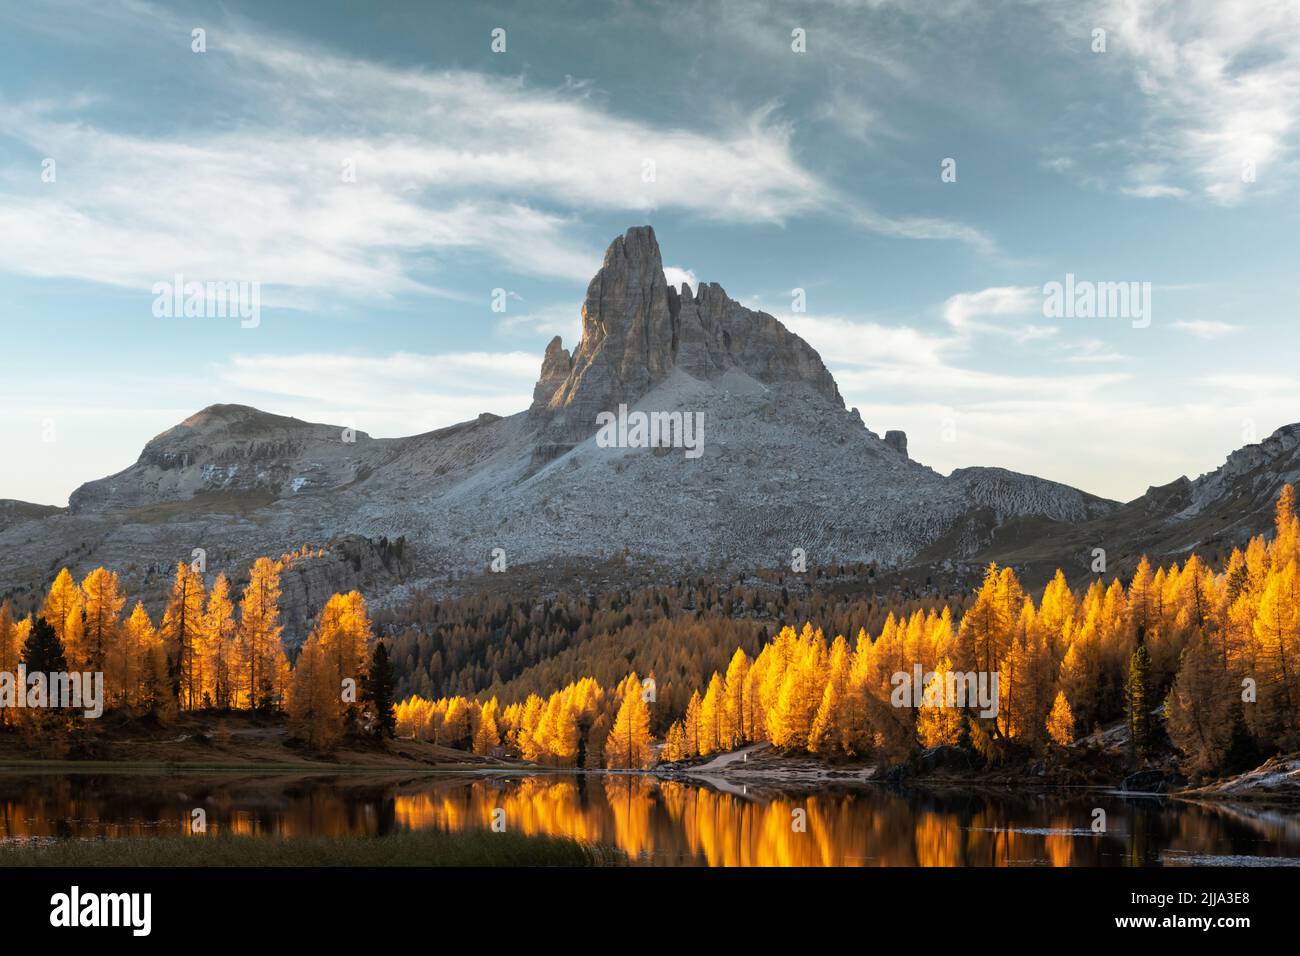 Picturesque view on Federa Lake in sunrise time. Autumn mountains landscape with Lago di Federa and bright orange larches in the Dolomite Apls, Cortina D'Ampezzo, South Tyrol, Dolomites, Italy Stock Photo